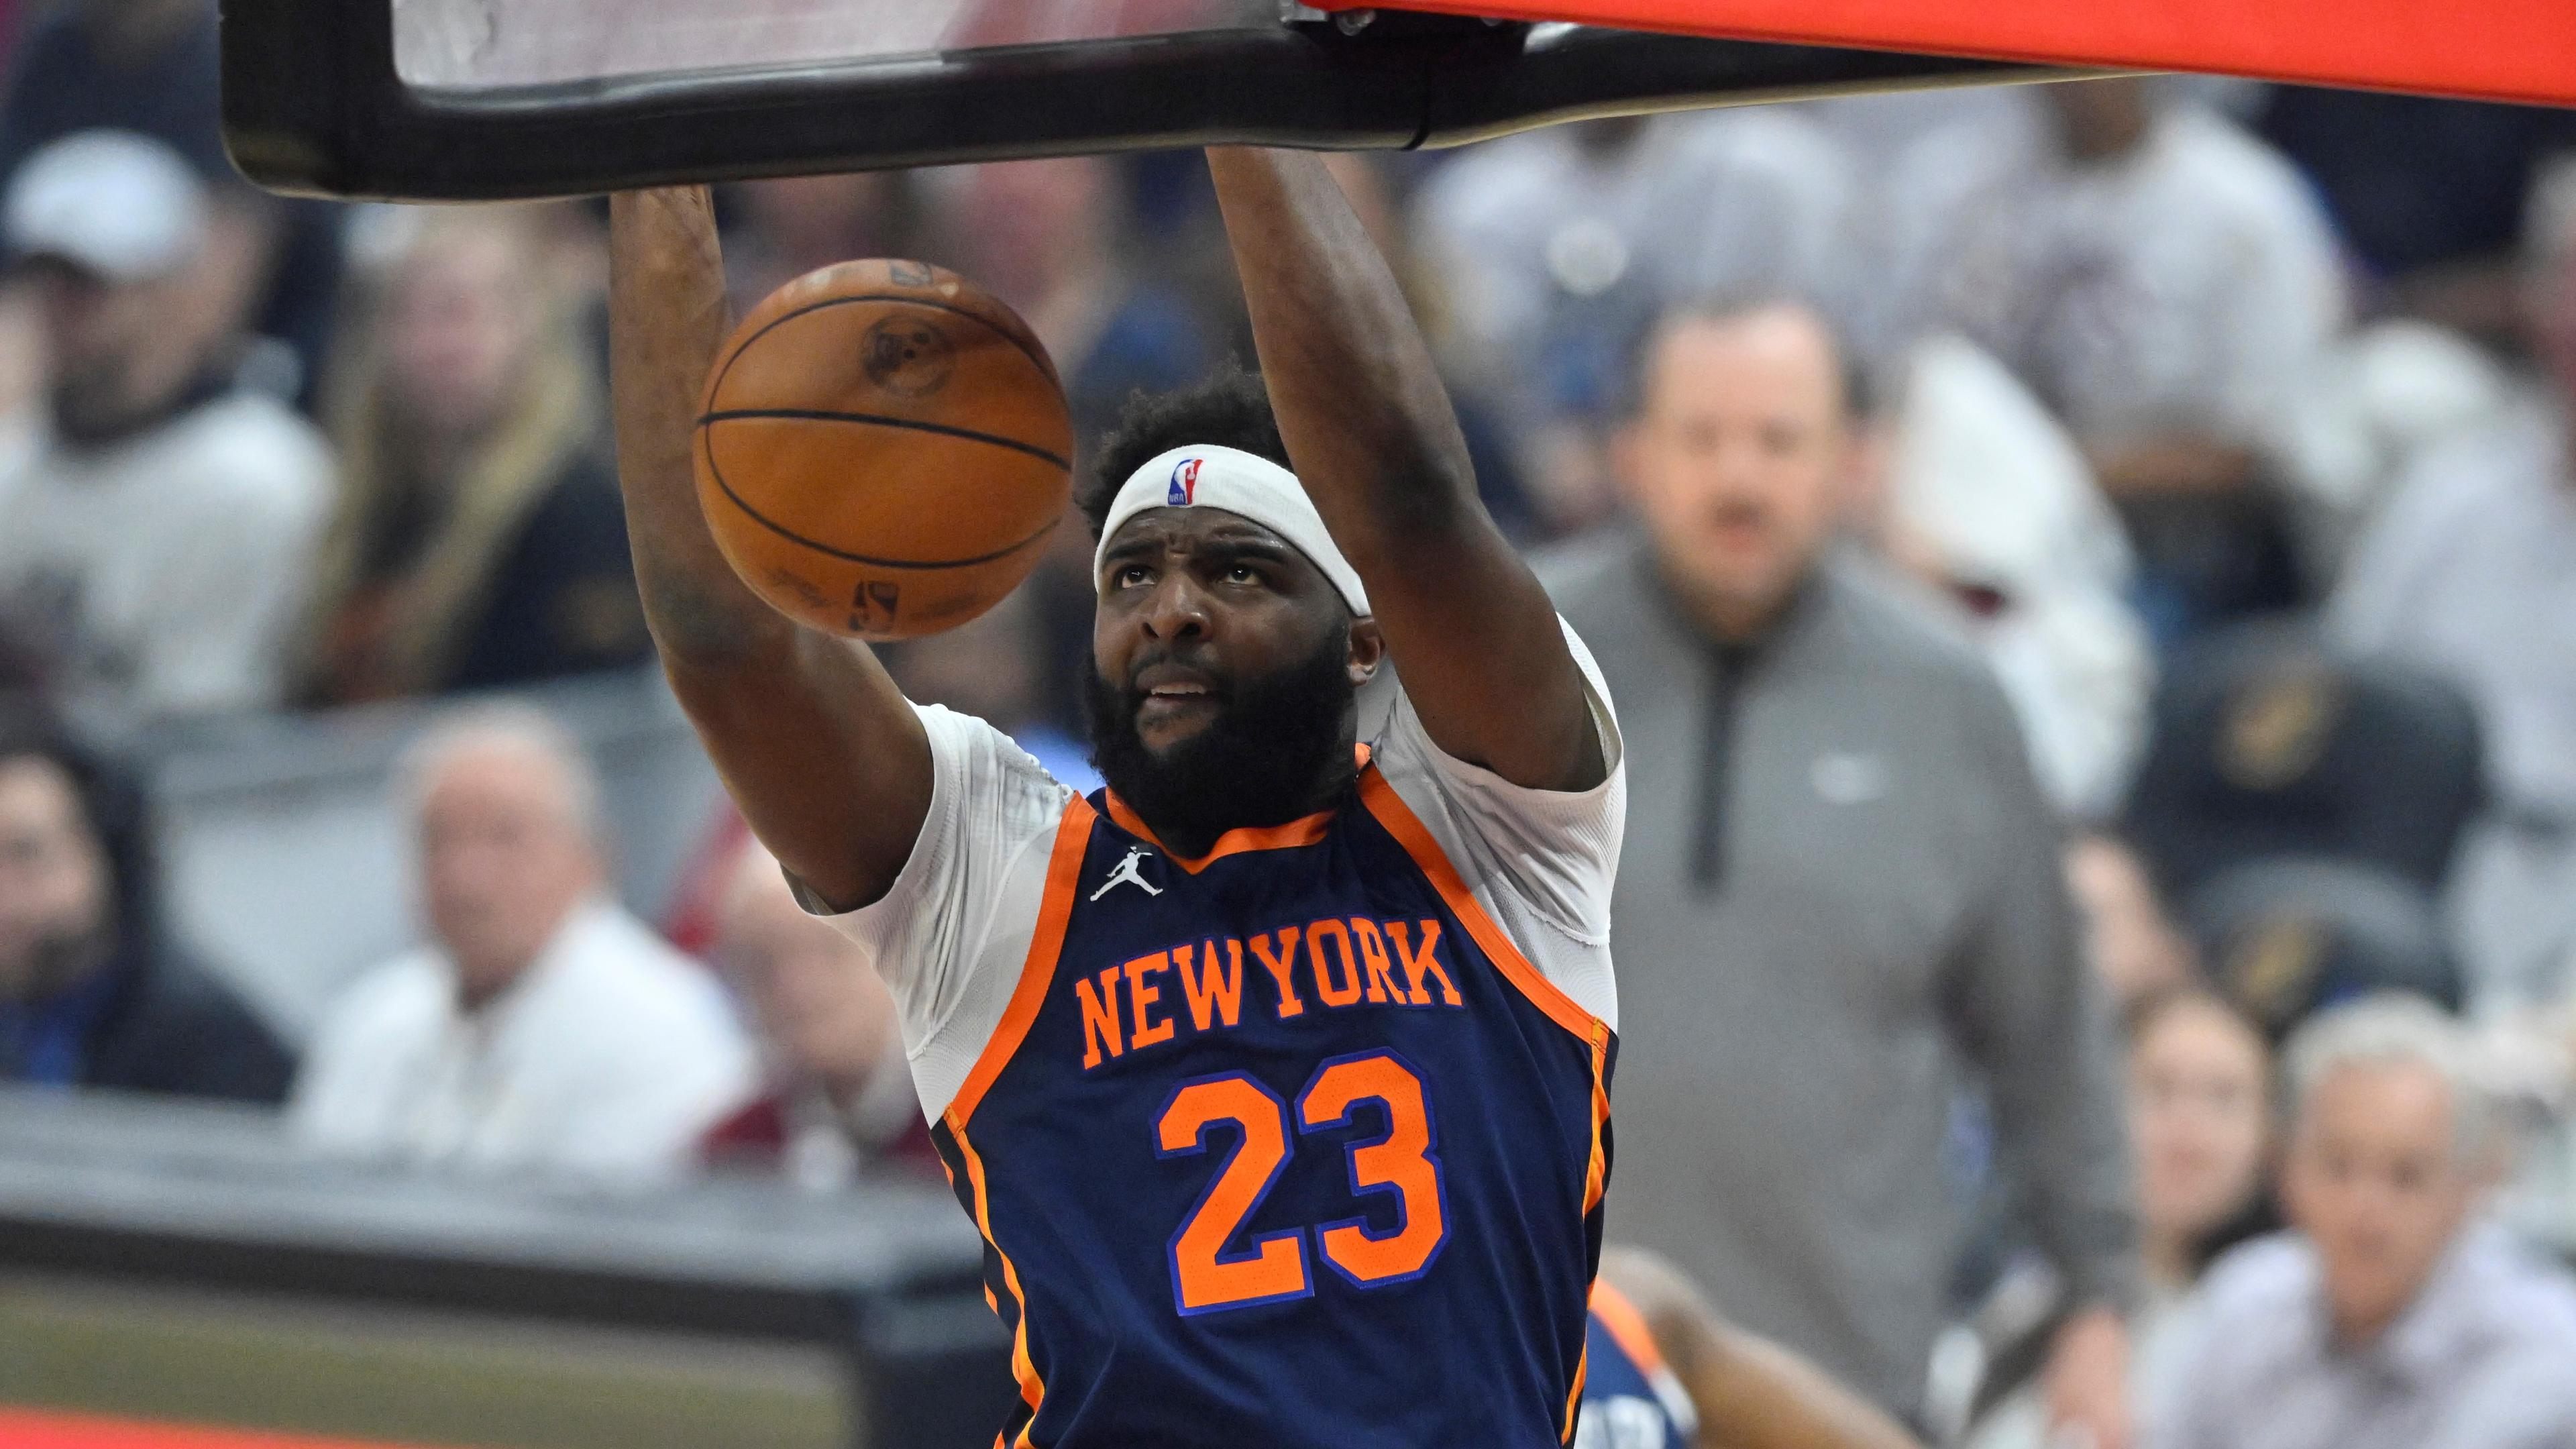 Apr 15, 2023; Cleveland, Ohio, USA; New York Knicks center Mitchell Robinson (23) dunks against the Cleveland Cavaliers in the first quarter of game one of the 2023 NBA playoffs at Rocket Mortgage FieldHouse. Mandatory Credit: David Richard-USA TODAY Sports / © David Richard-USA TODAY Sports